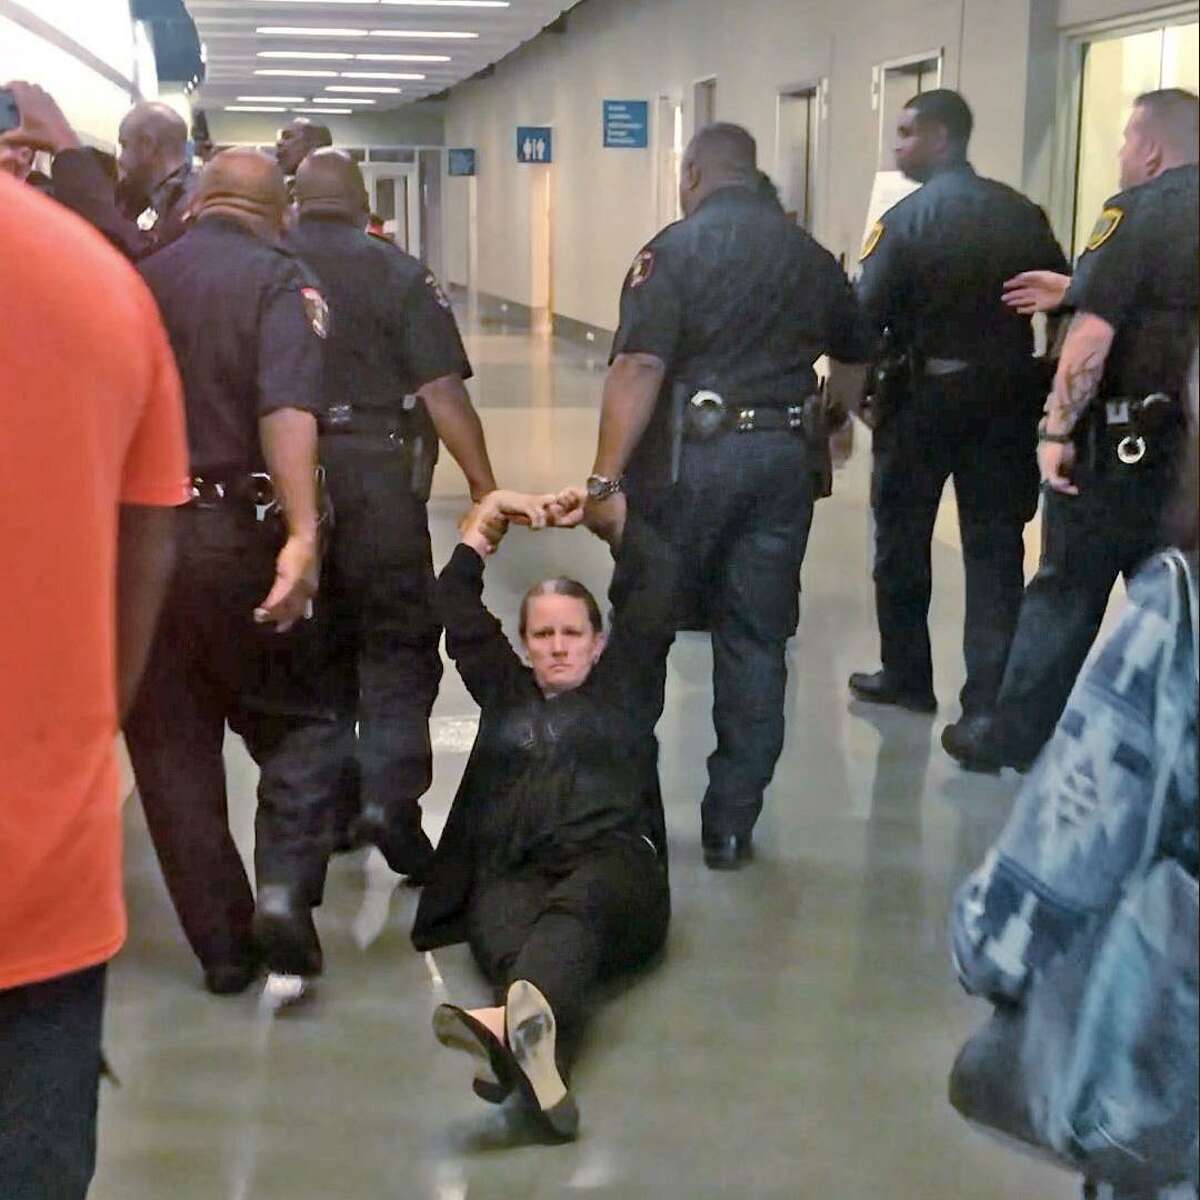 In this April file photo, law enforcement officers drag Jenny Espeseth out of Houston ISD's board room and down a hallway. Espeseth, who has two children enrolled in HISD schools, refused to leave the board room after HISD Board President Rhonda Skillern-Jones ordered it be cleared during a special school board meeting. While Espeseth was released minutes later, two other women at the meeting were transported to the Harris County Jail before their misdemeanor charges were dropped on Wednesday. This is a still image taken from video.